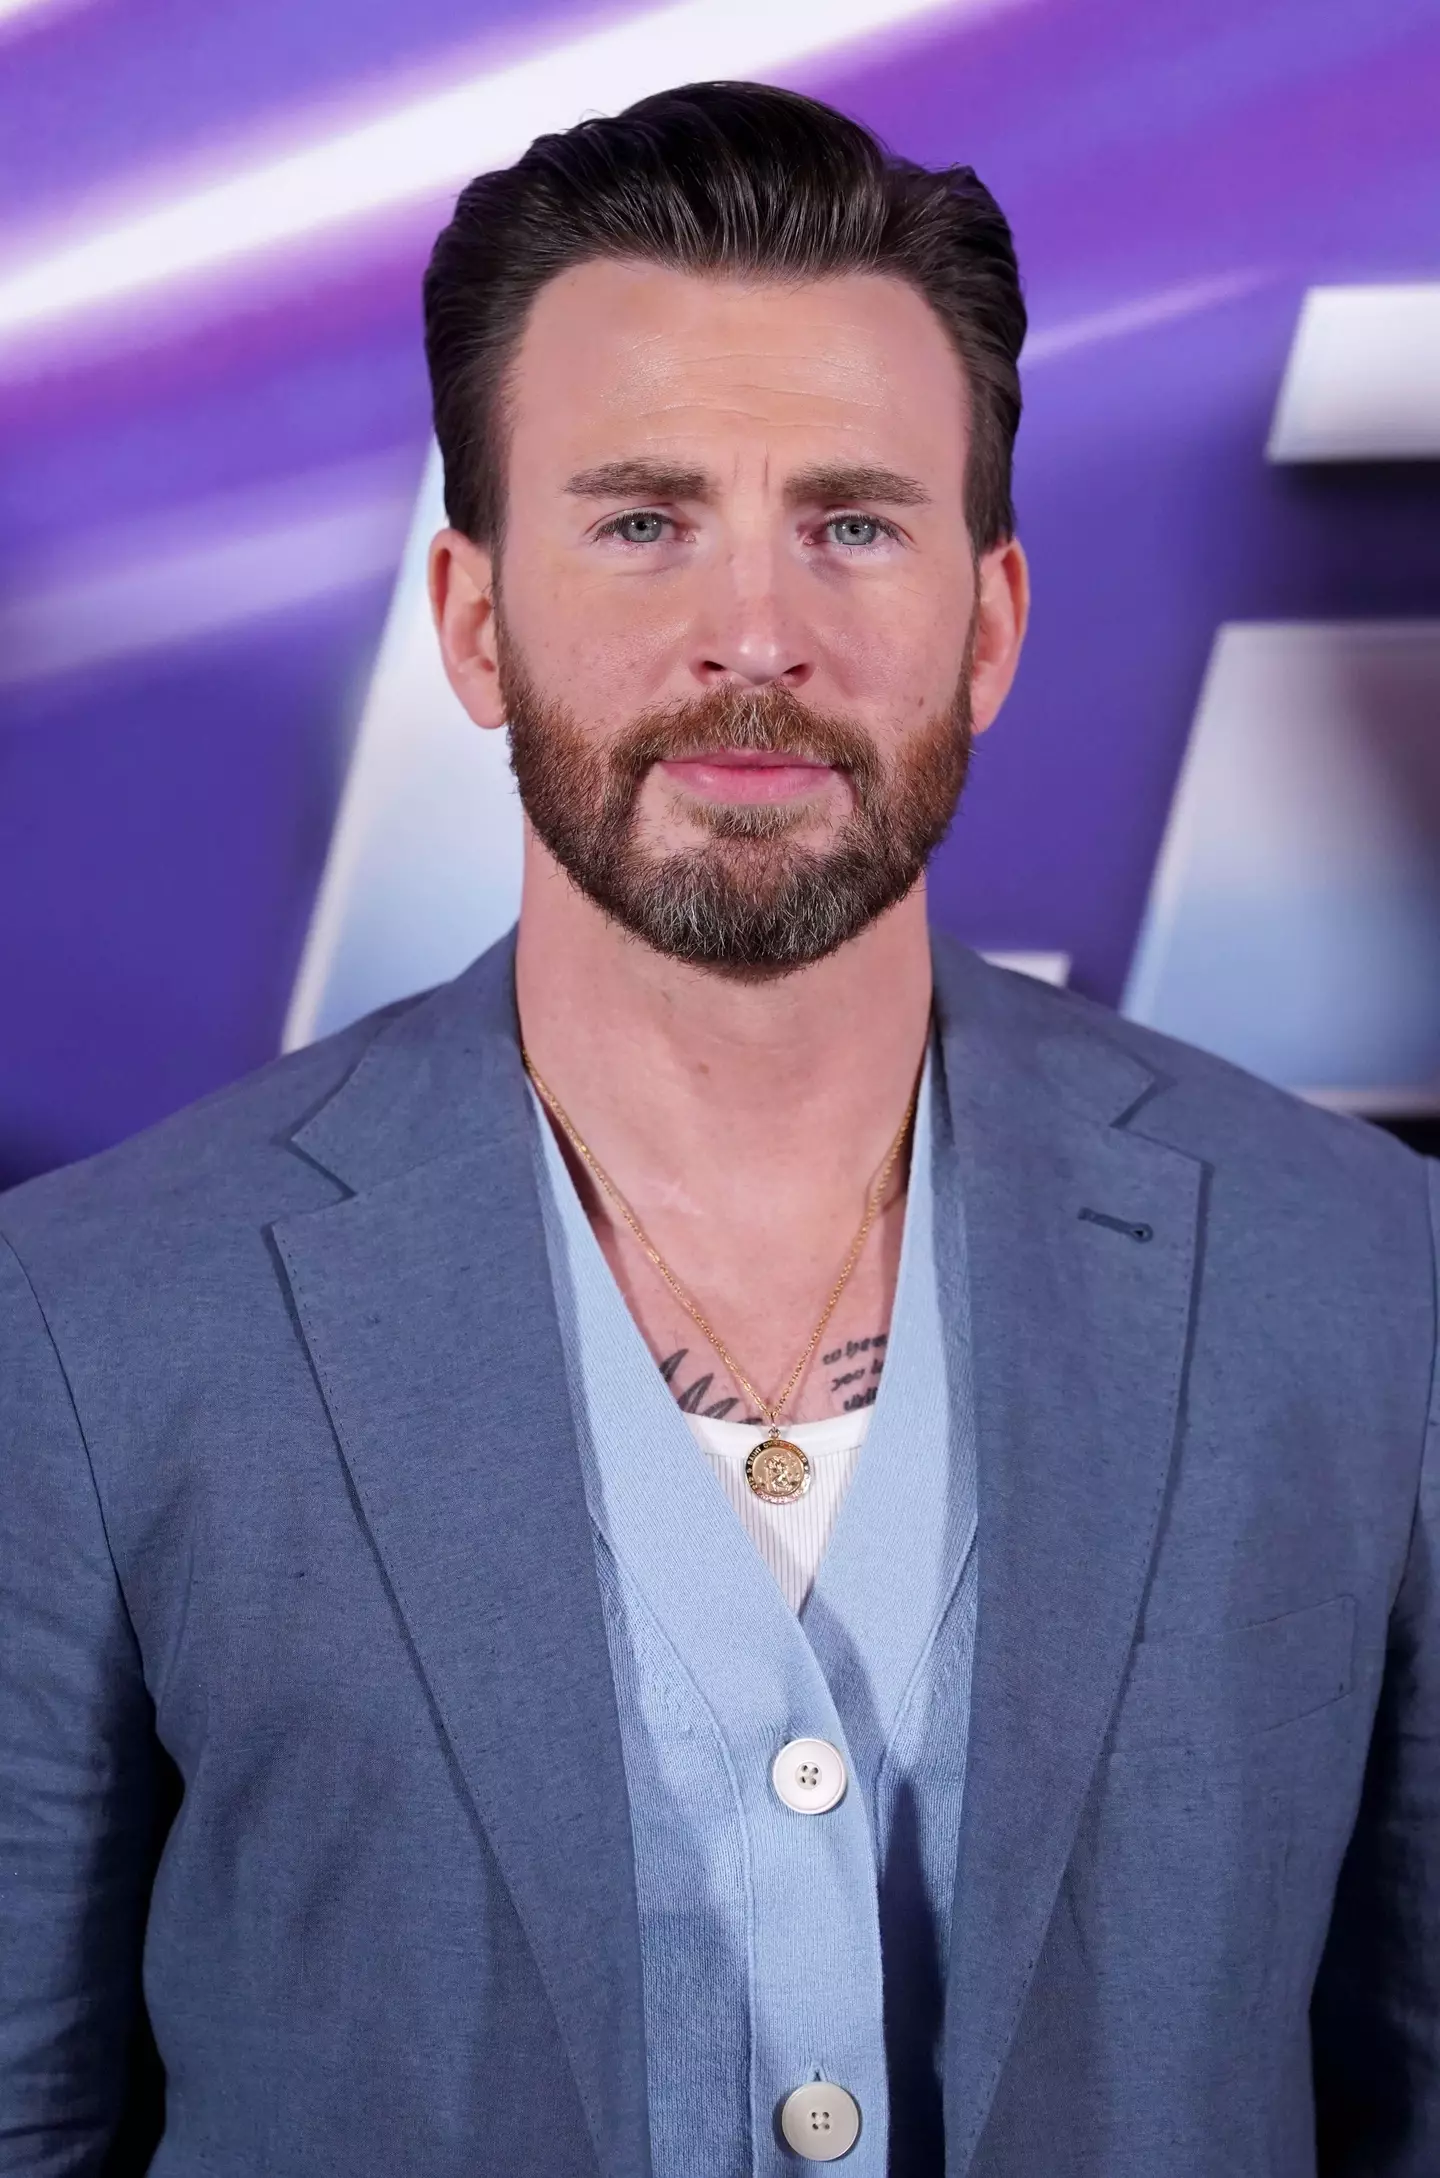 Chris Evans was unaware that Strong had been asked to play his body double.